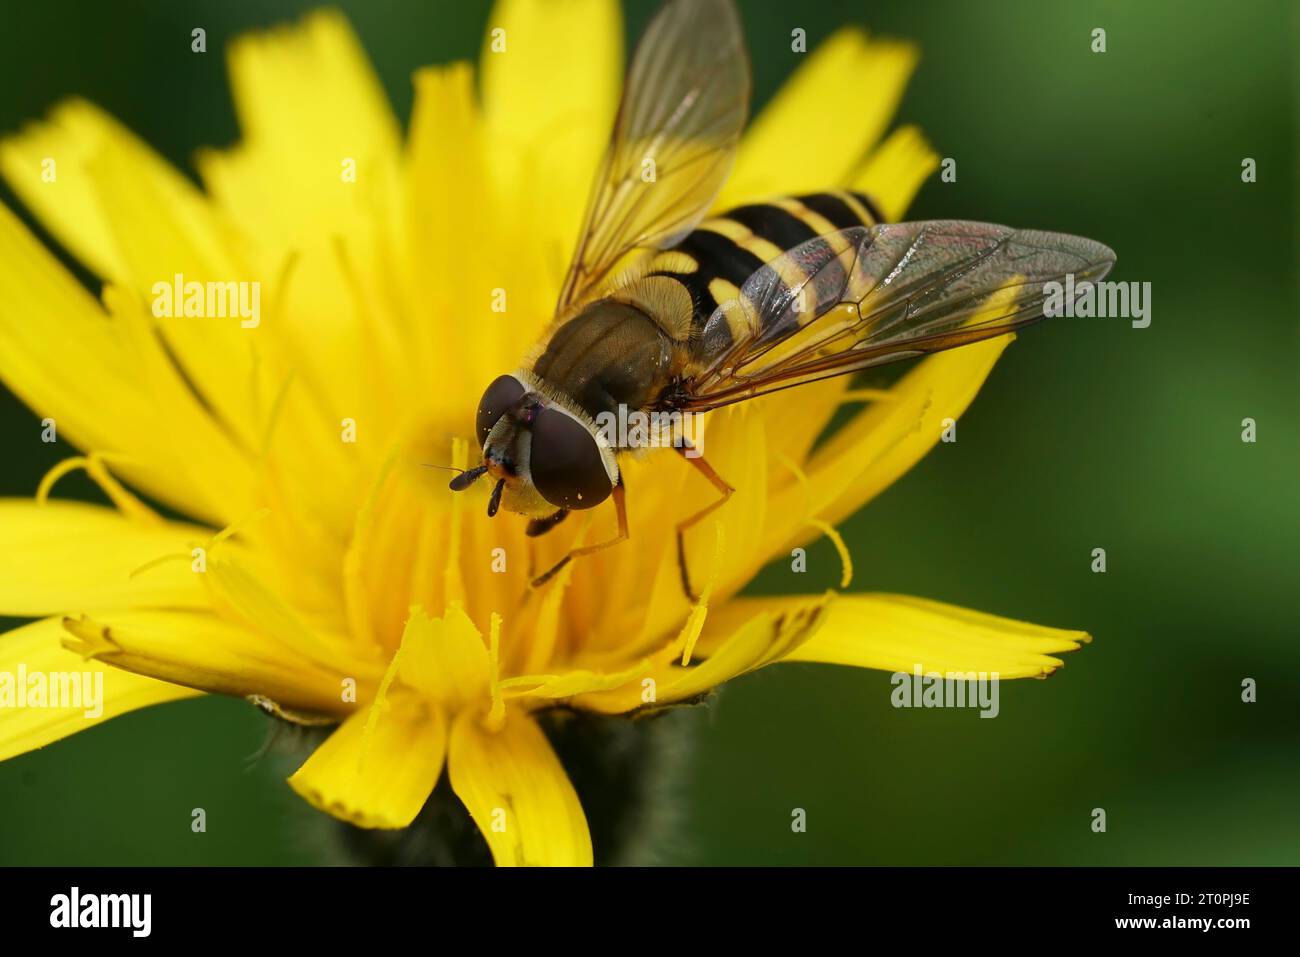 Natural closeup on the Common banded hoverfly, Syrphus ribesii sitting on a yellow flower Stock Photo